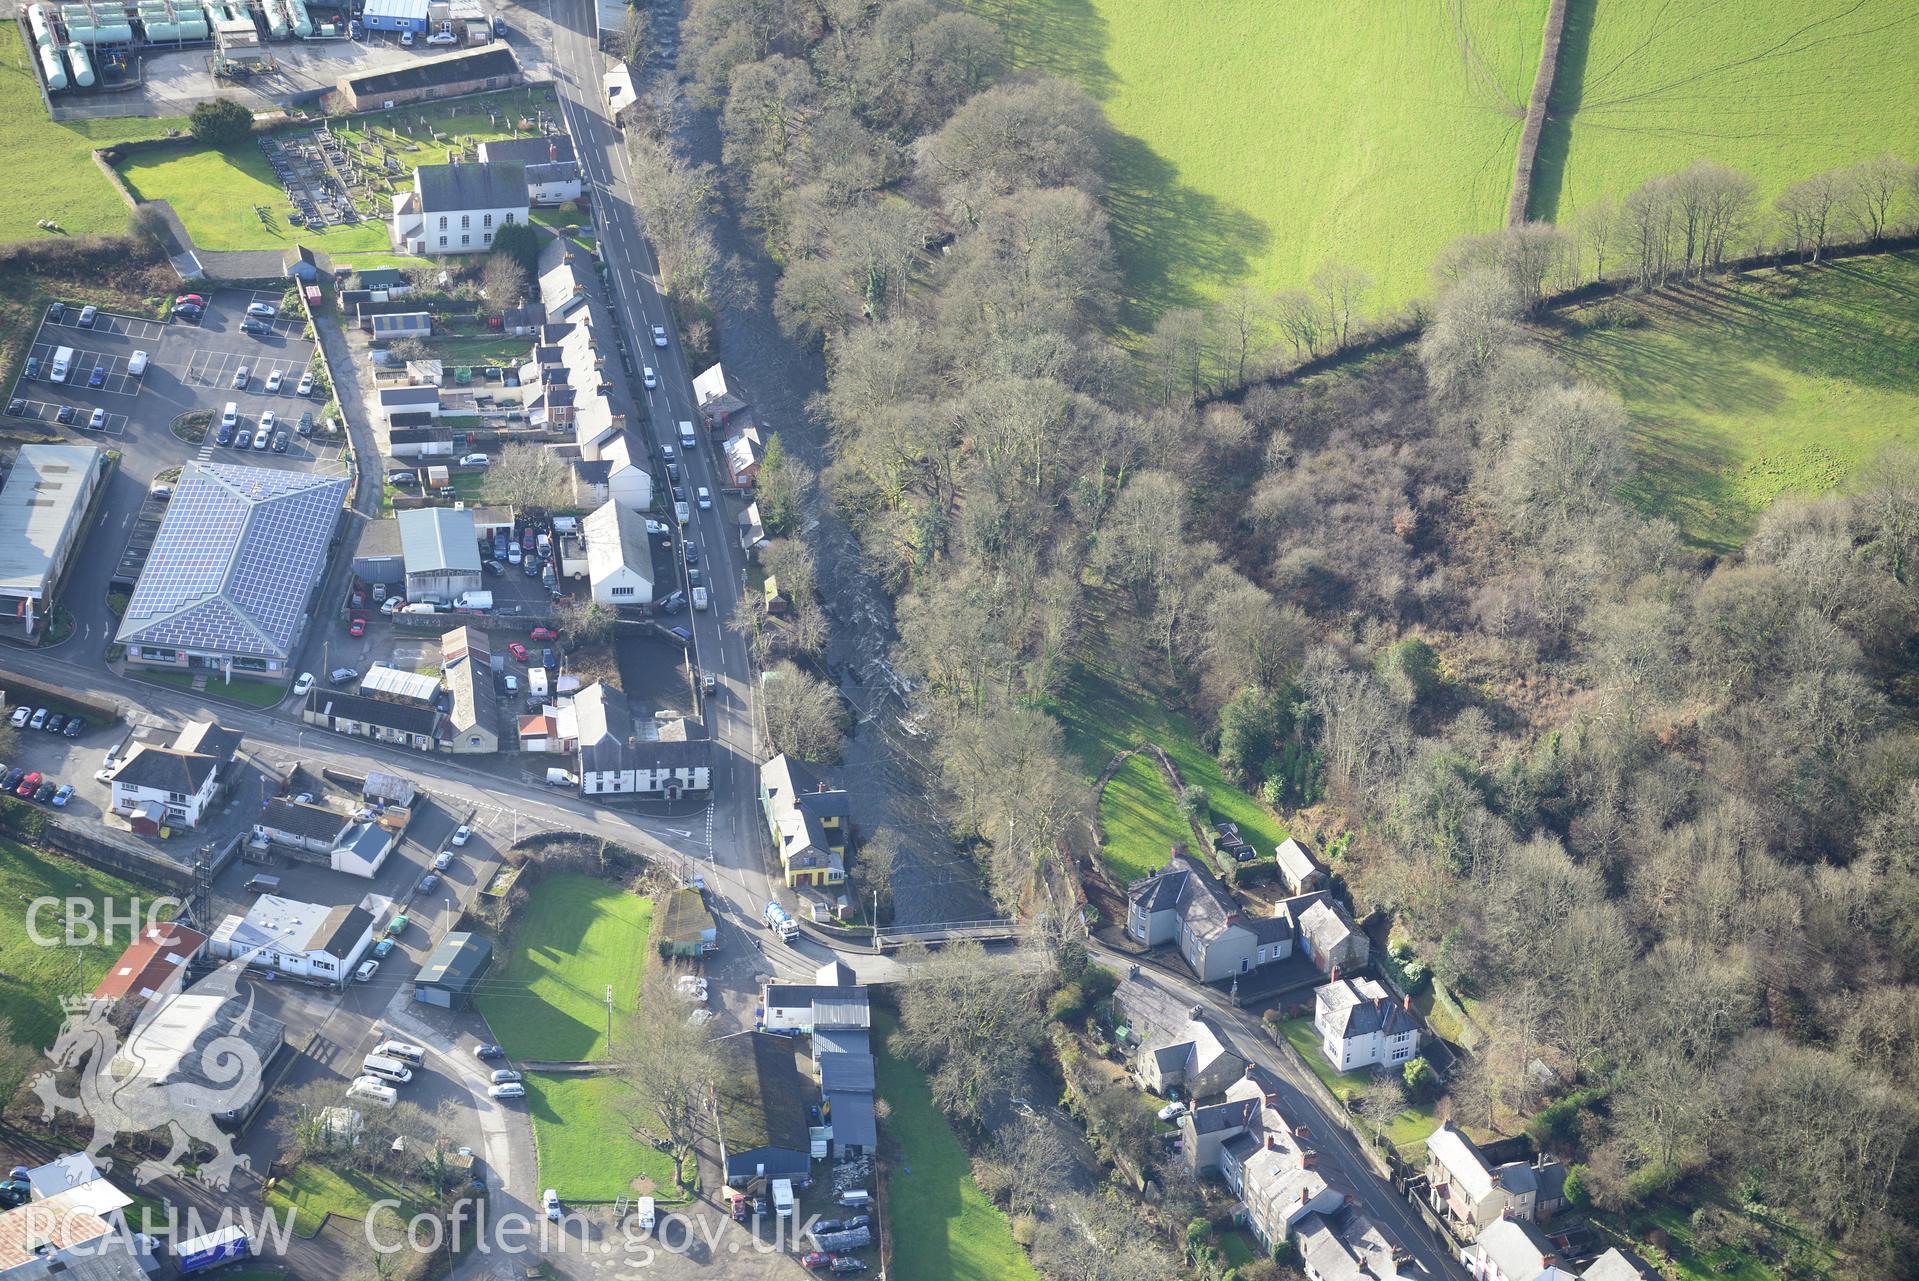 Pen-y-Bont Baptist Church and Vestry; Llandysul Bridge and Tyssil Castle, Llandysul. Oblique aerial photograph taken during the Royal Commission's programme of archaeological aerial reconnaissance by Toby Driver on 6th January 2015.